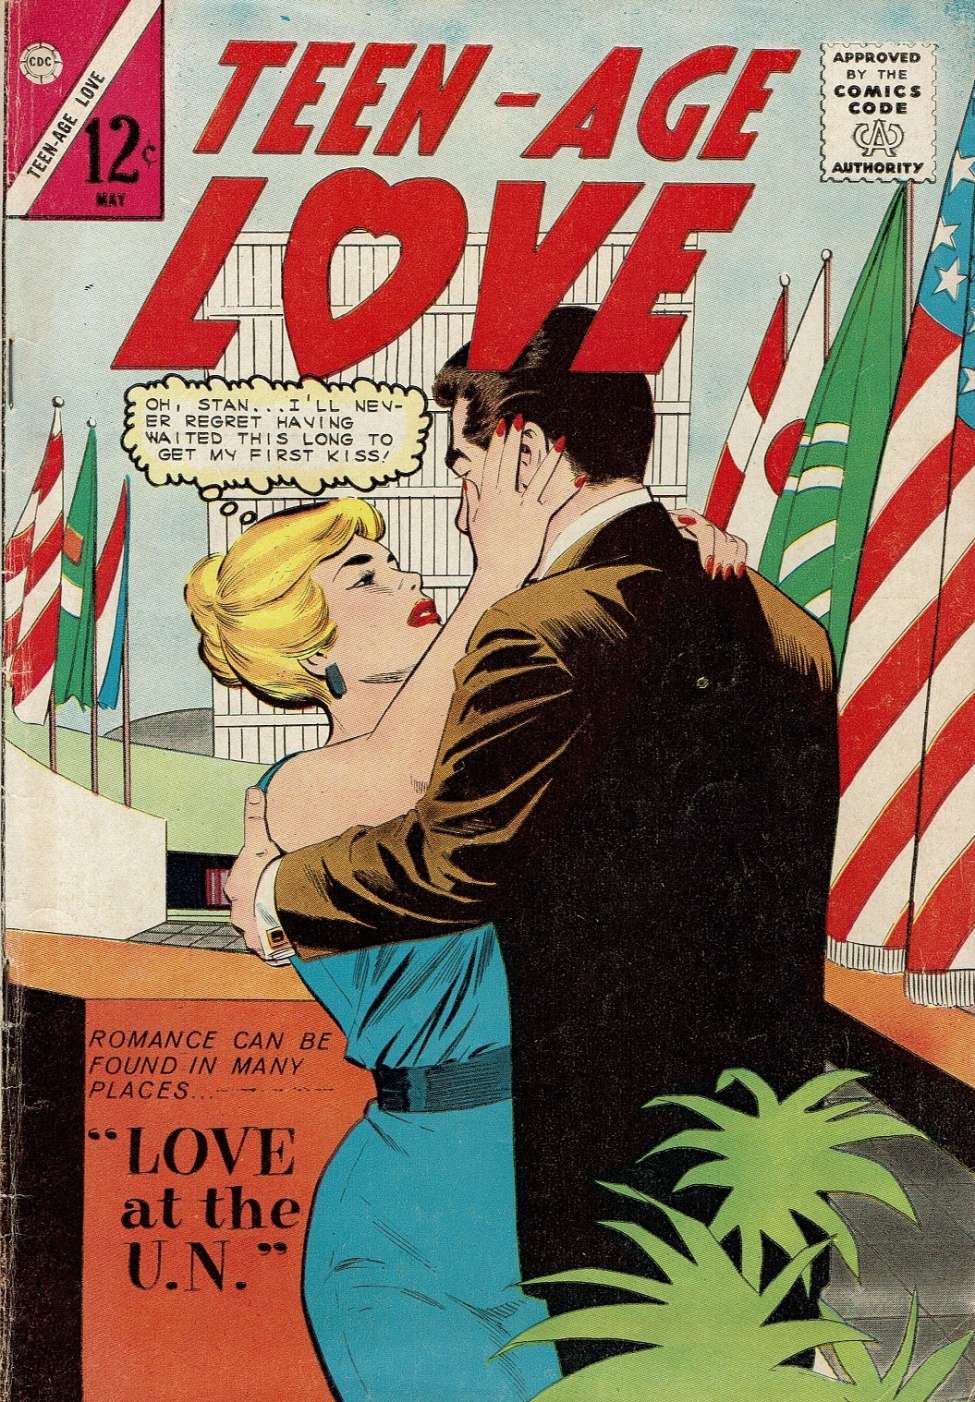 Book Cover For Teen-Age Love 37